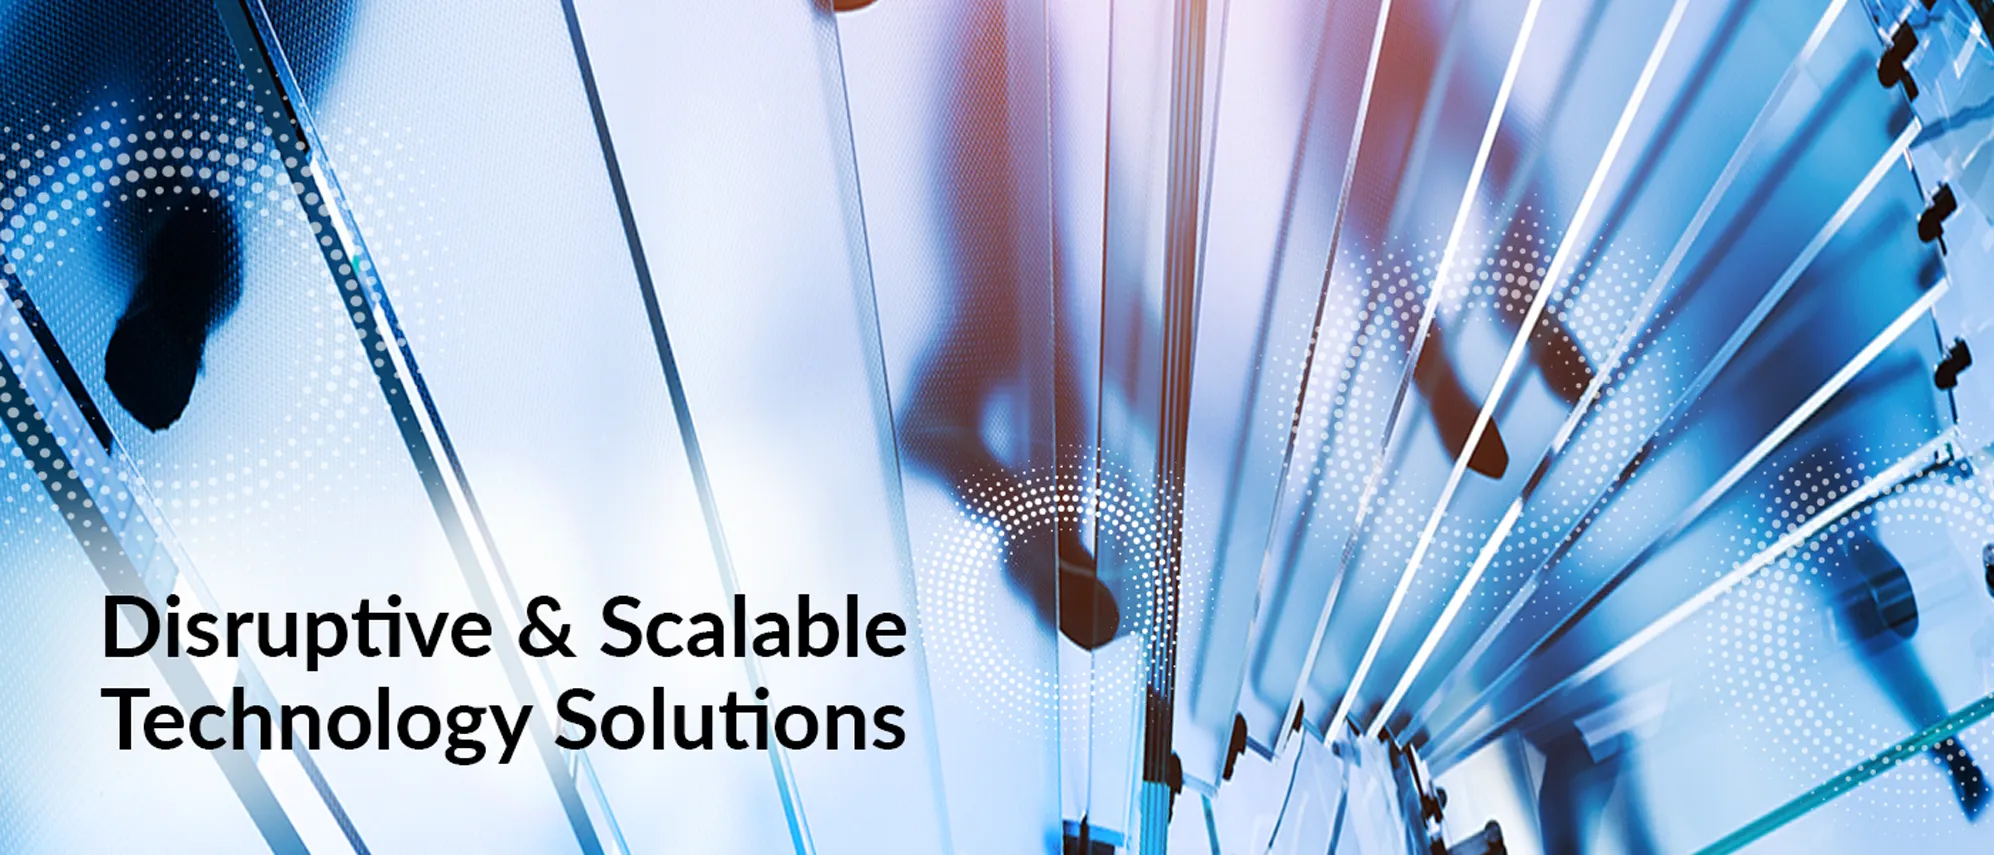 Disruptive & Scalable Technology Solutions